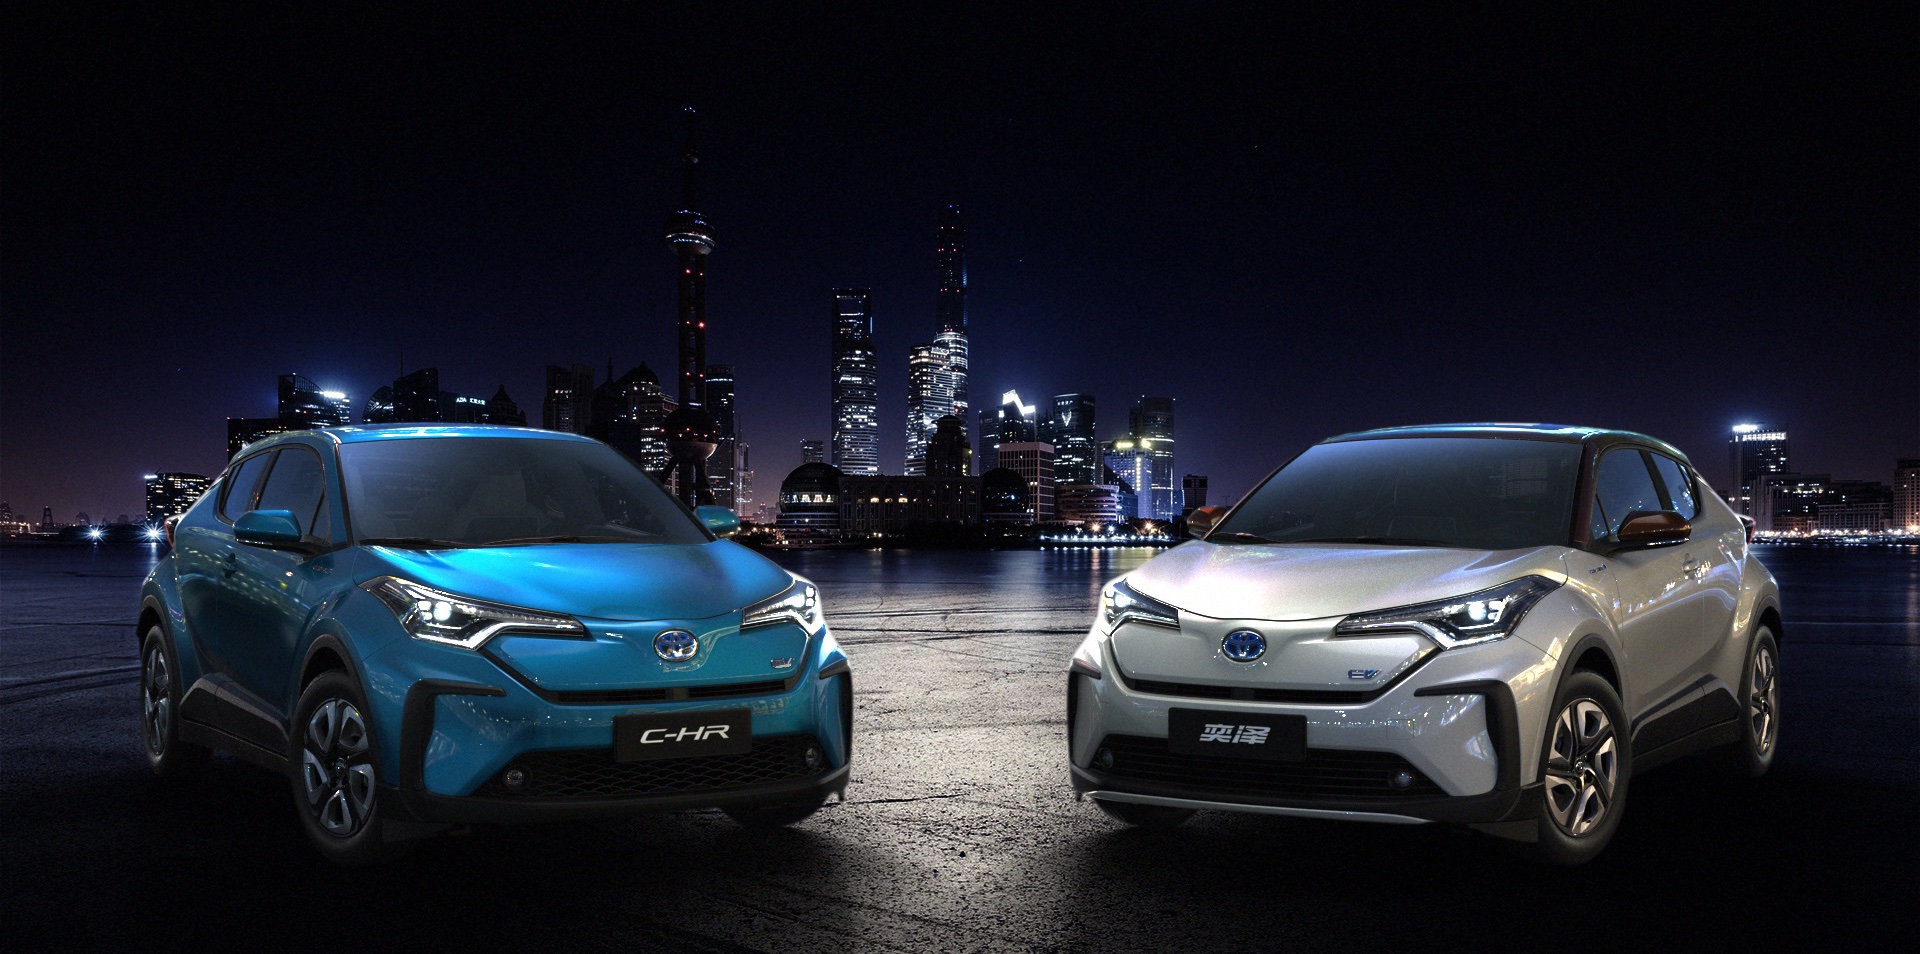 Toyota will build an EV plant in Tianjin China in 2020 